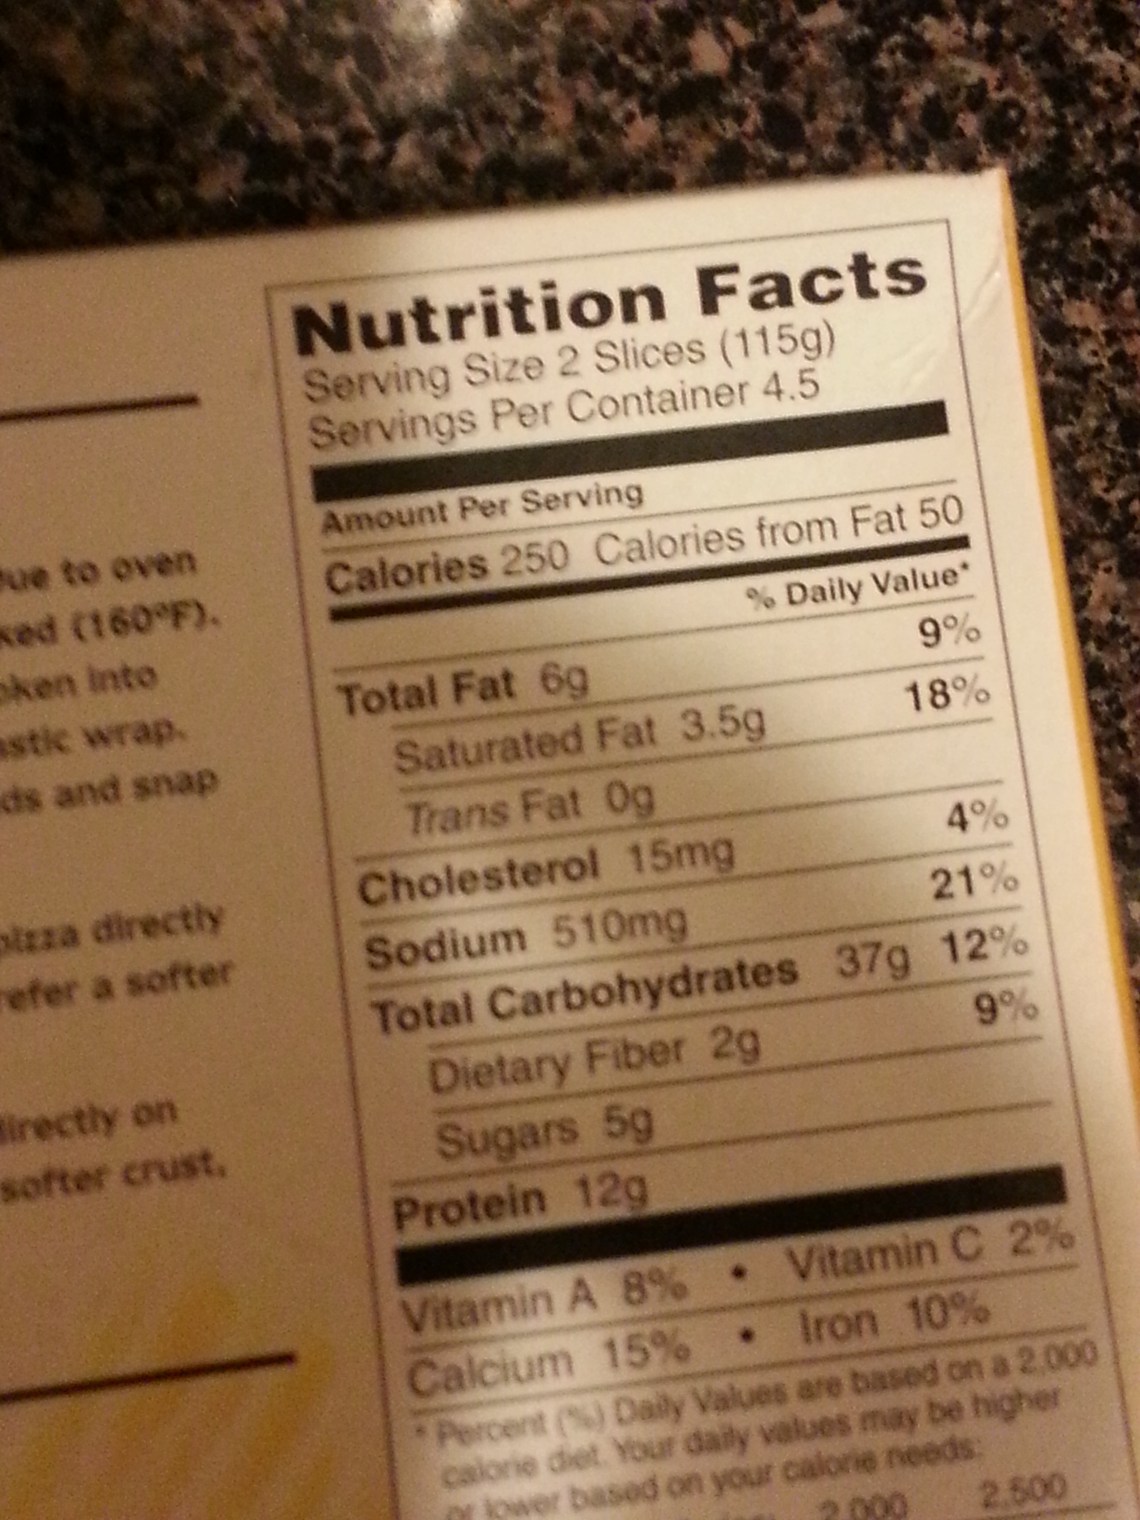 That's the serving size?